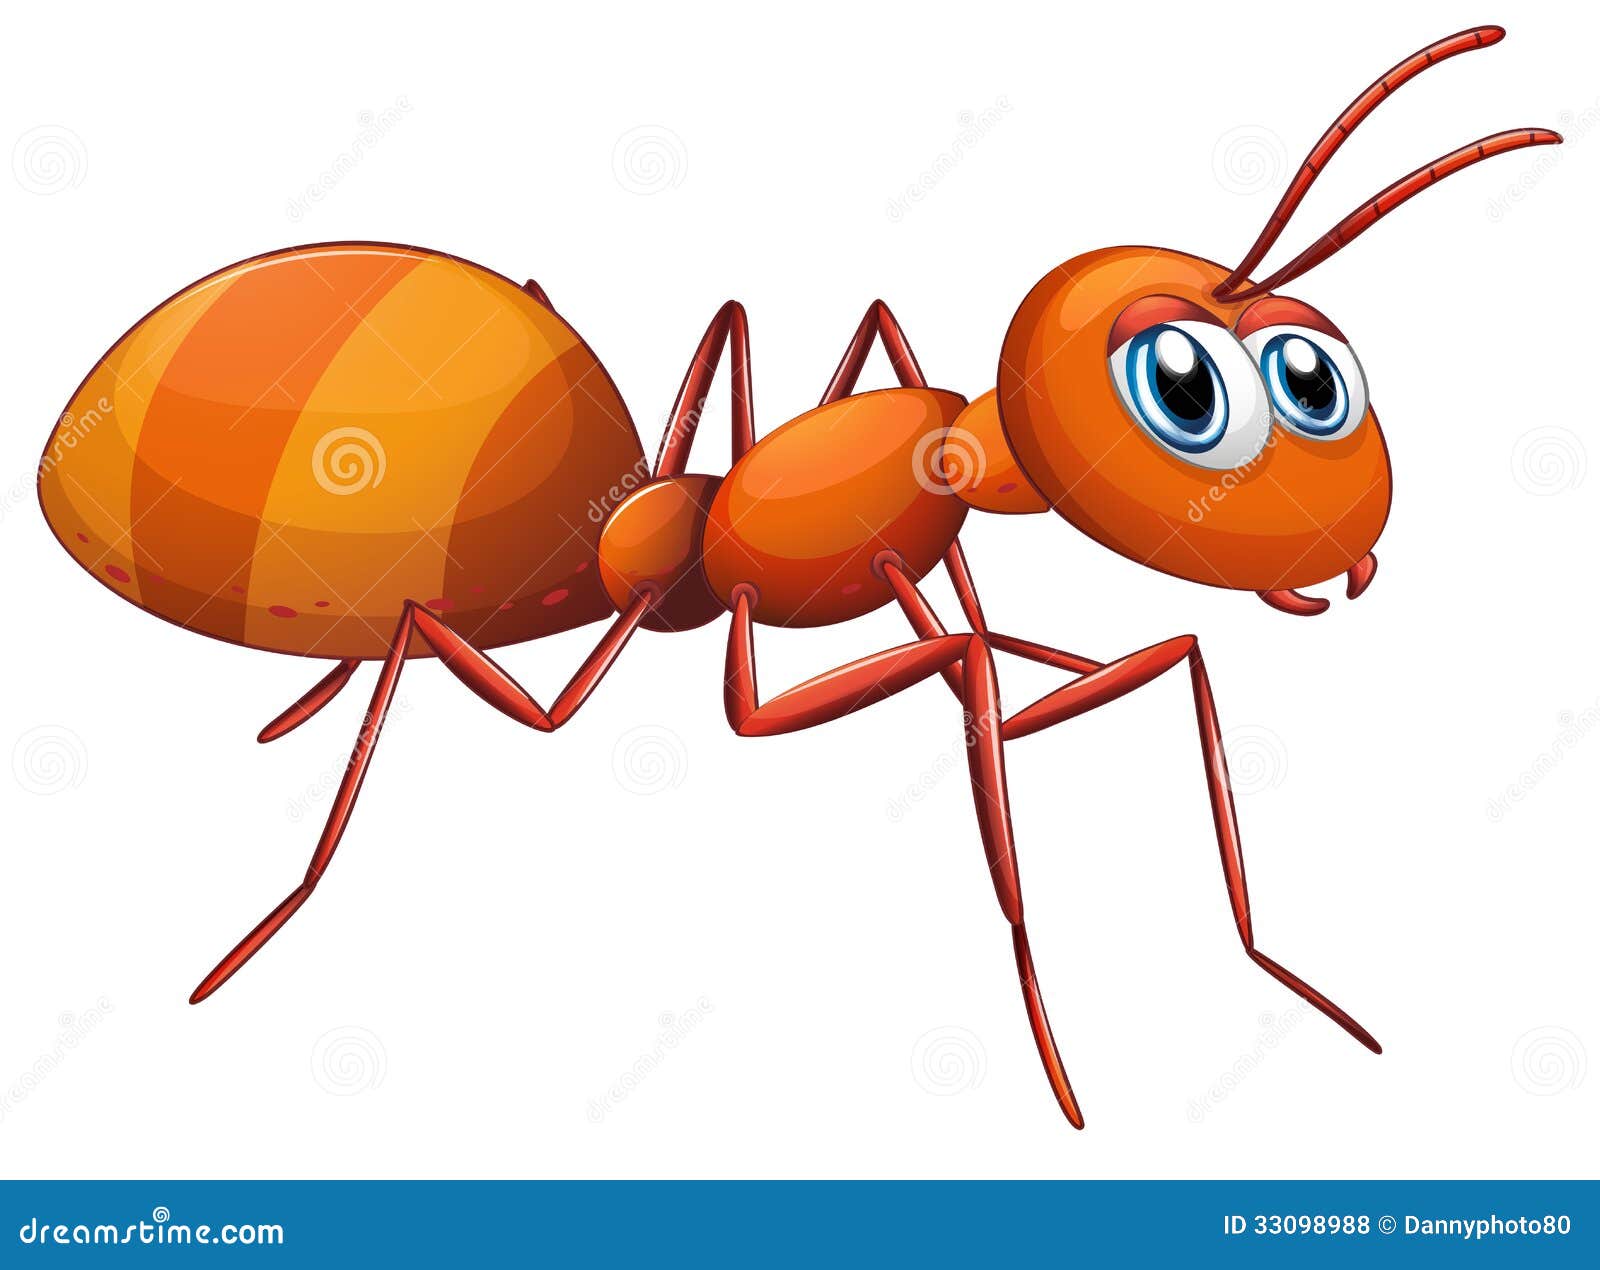 queen ant clipart - photo #32